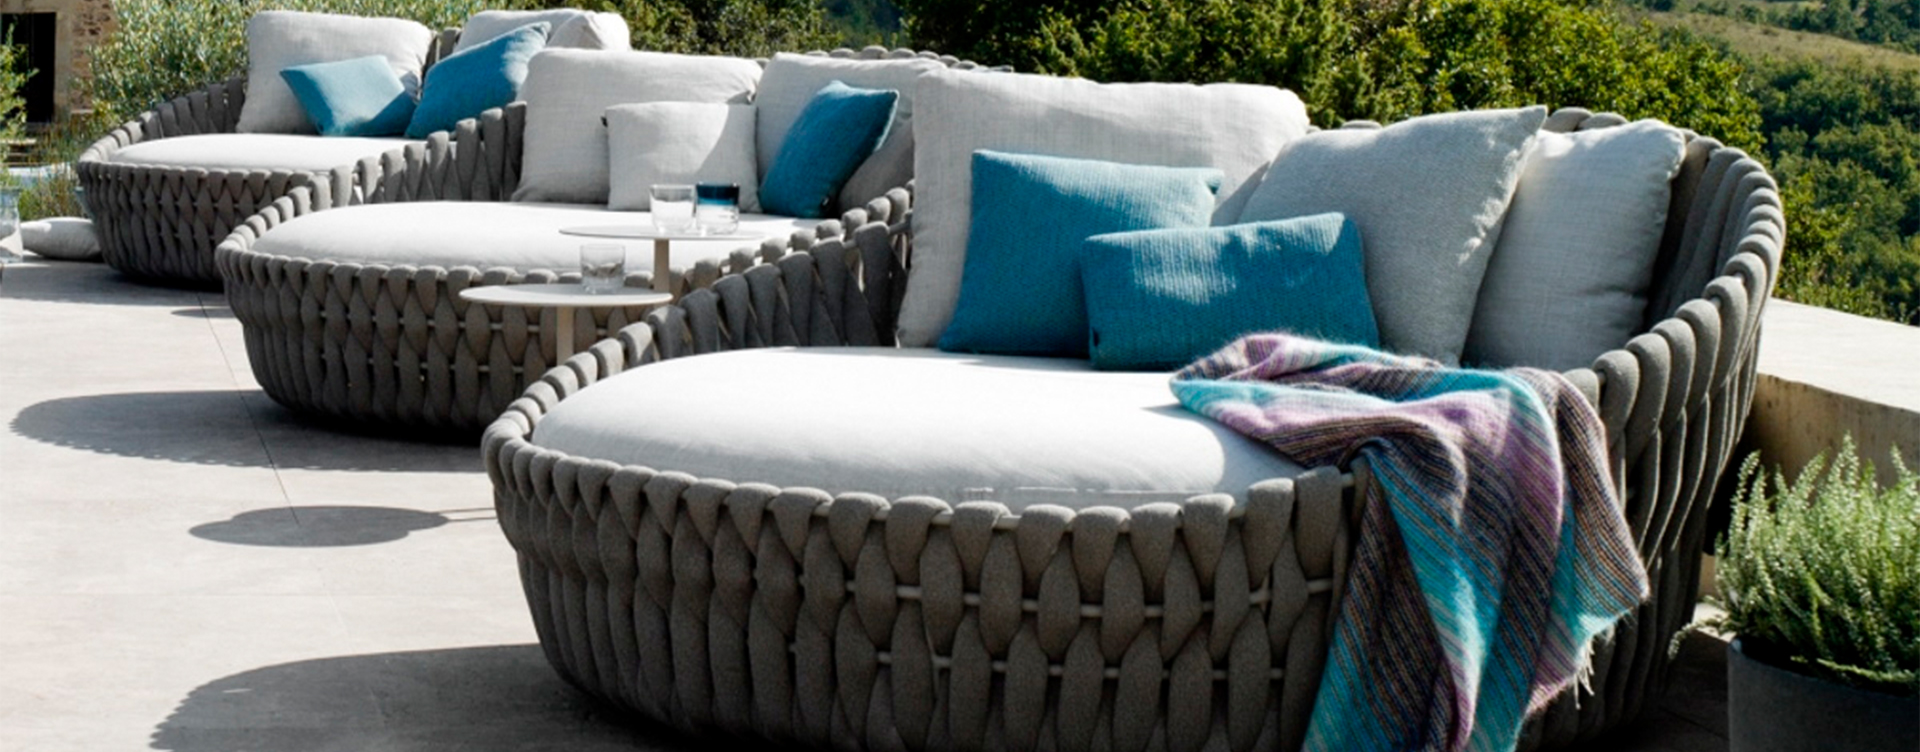 Some Remarkable Reasons to Start Shopping for Some Outdoor Furniture